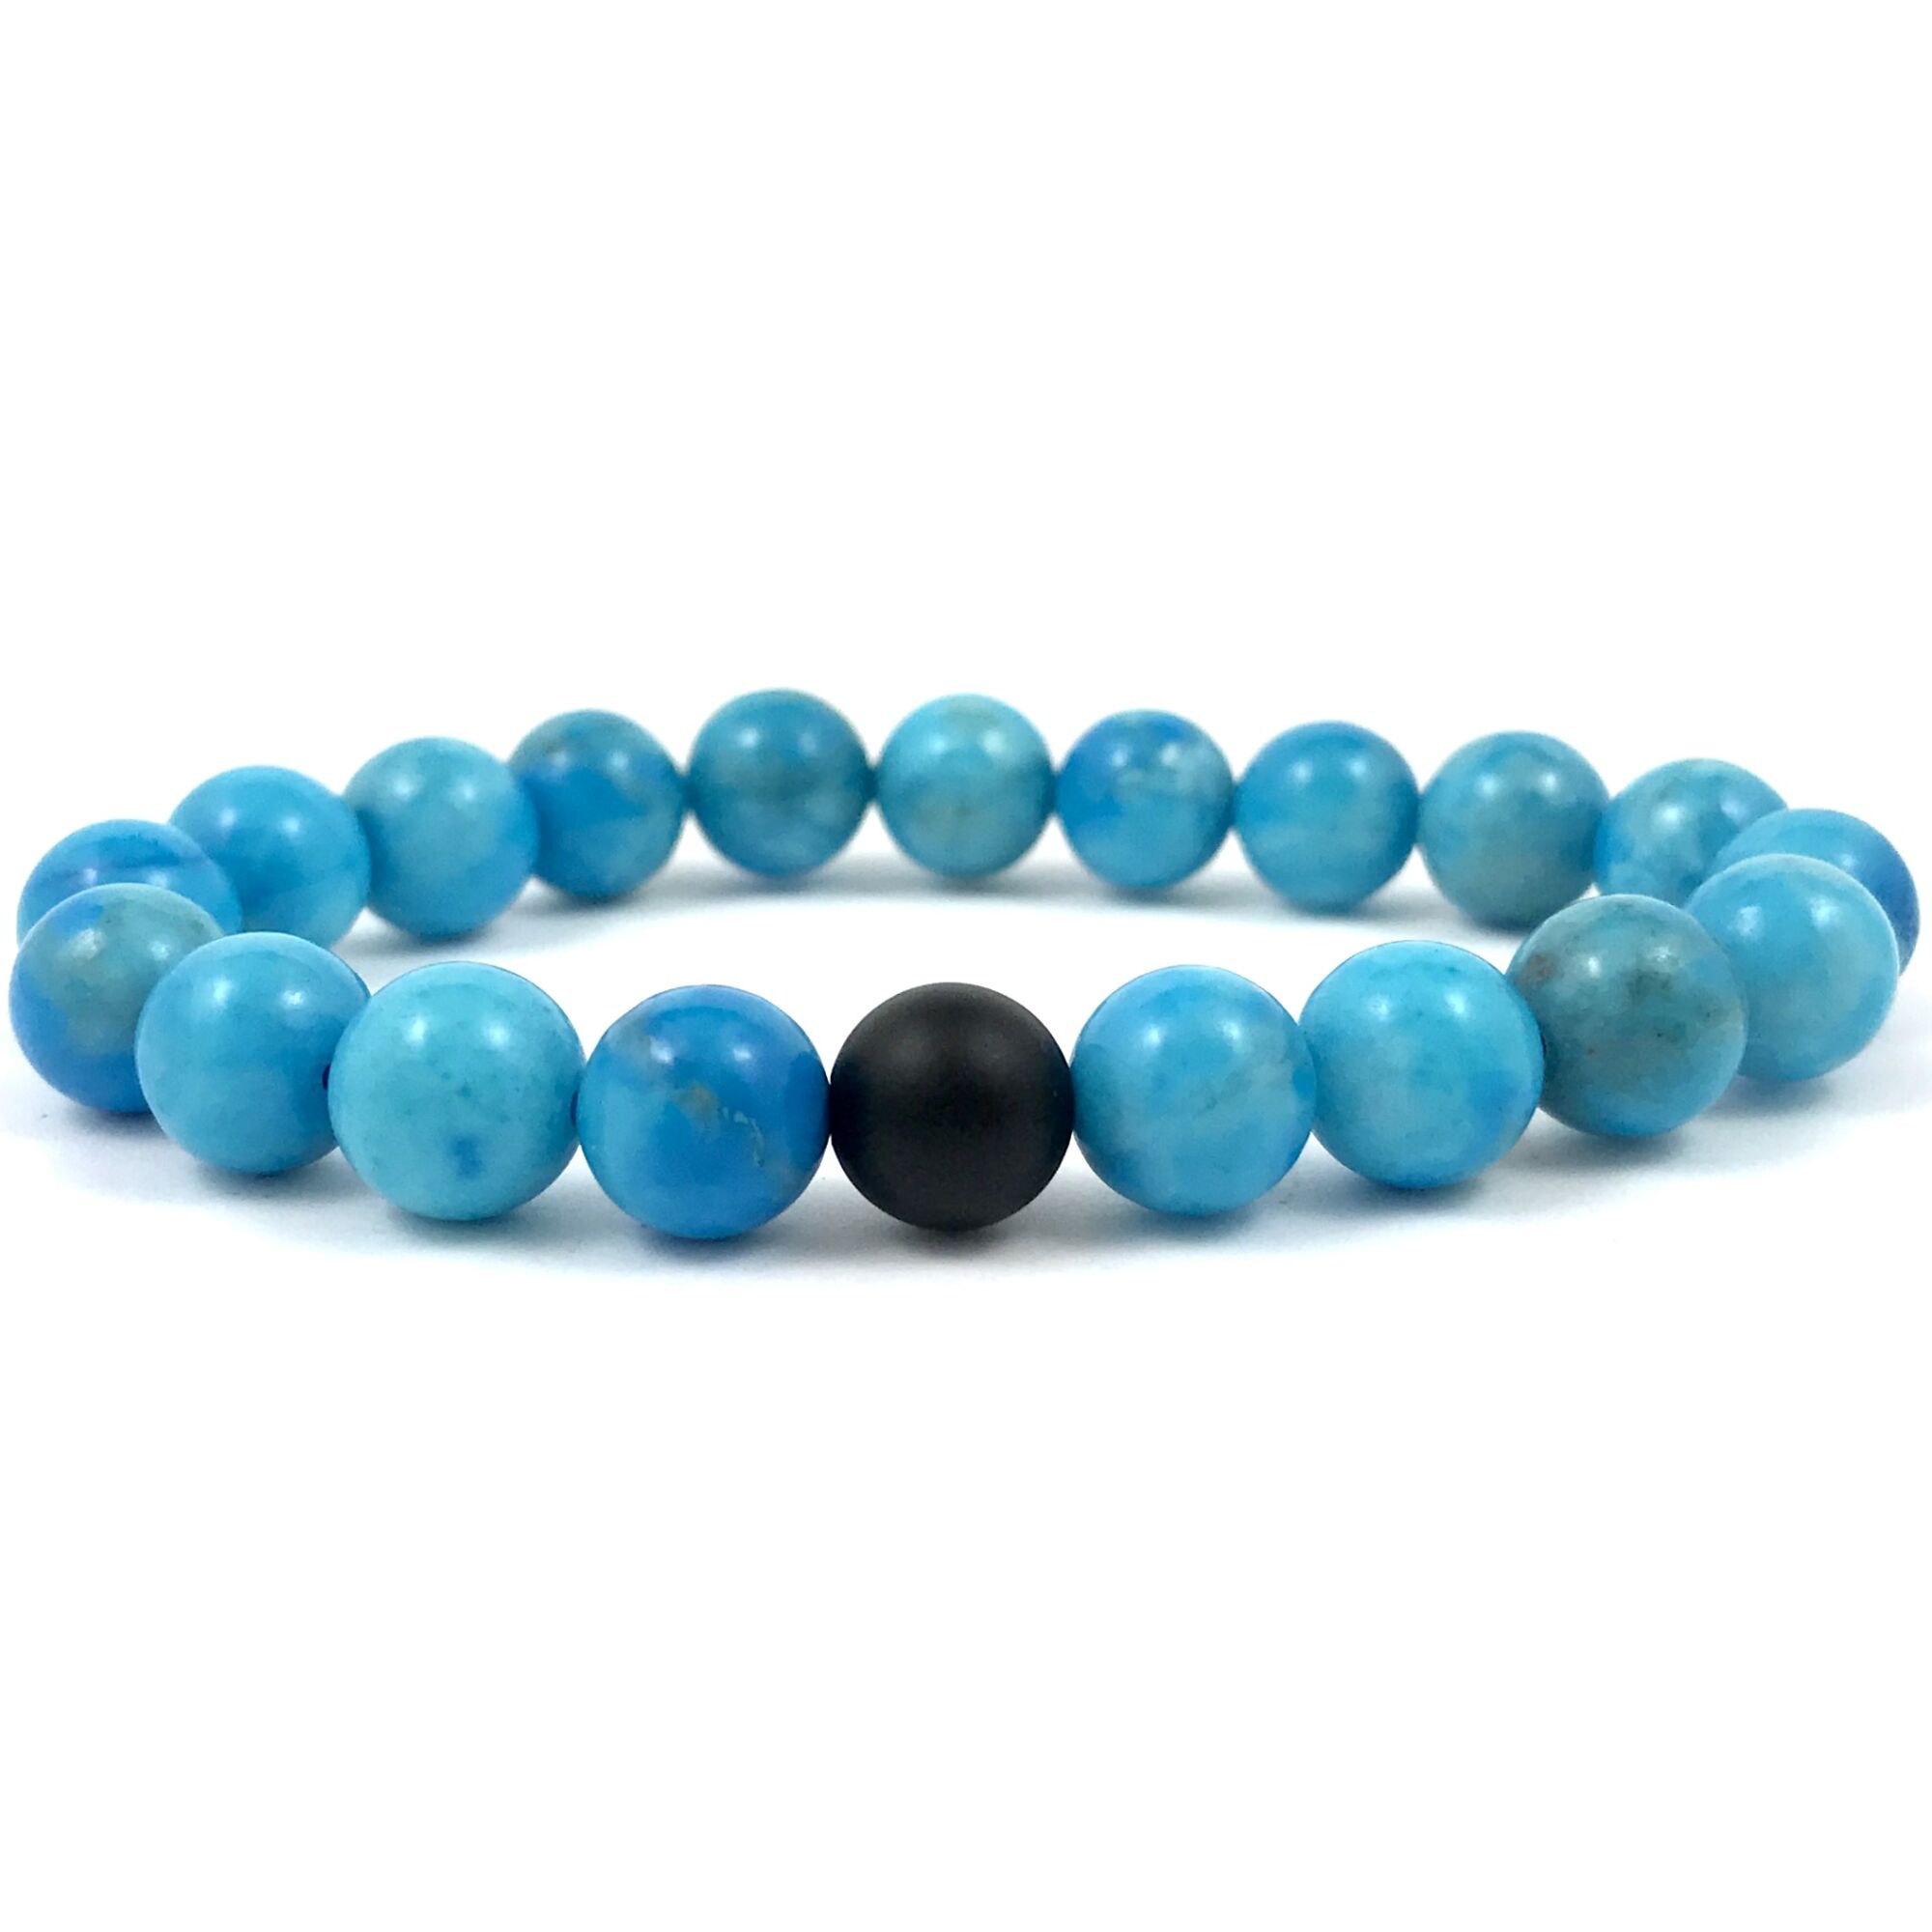  Turquoise and matte onyx fleck pearl bracelet